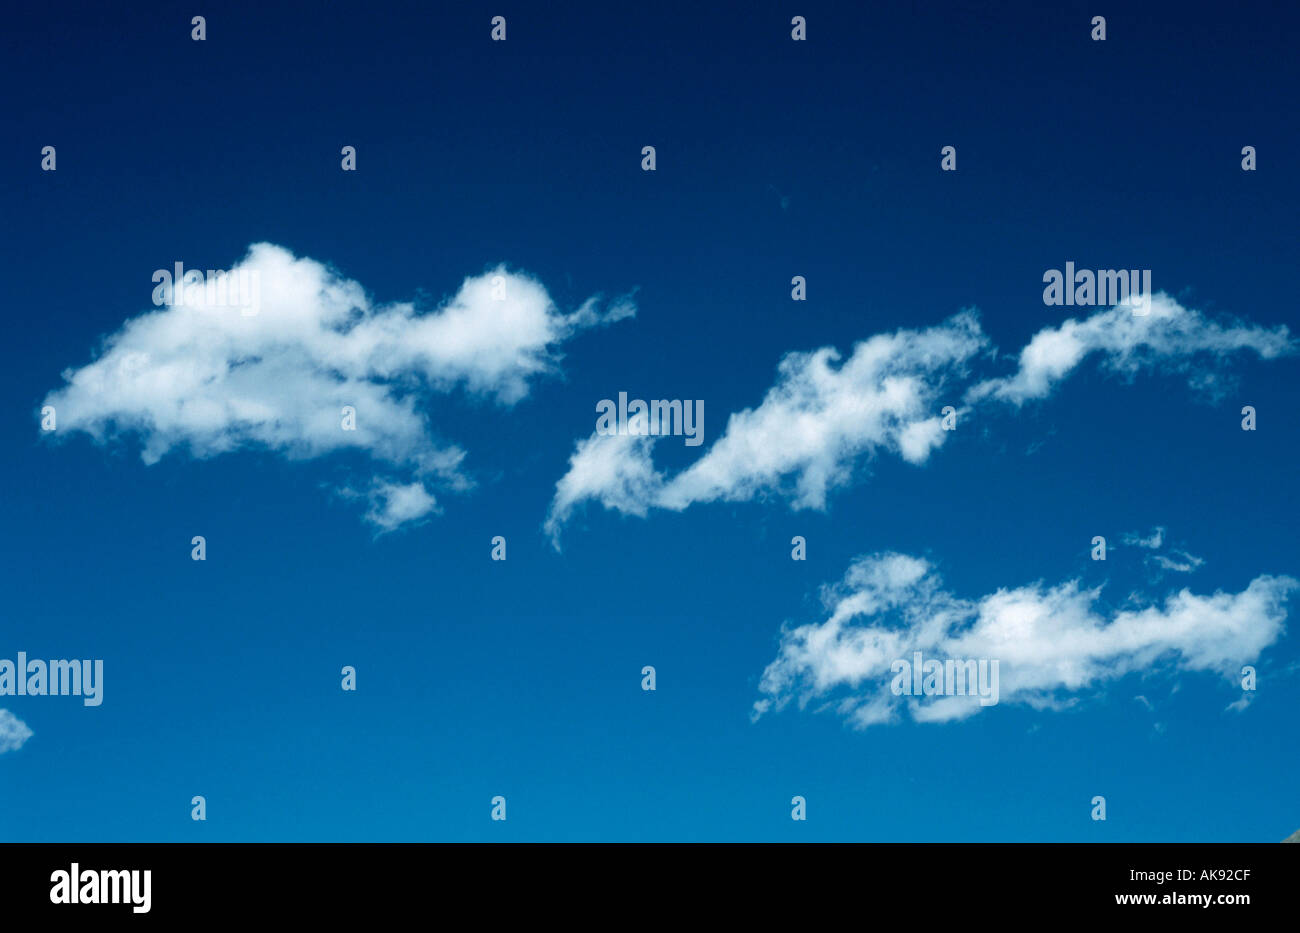 Sky with clouds Himmel mit Wolken Querformat horizontal Stock Photo